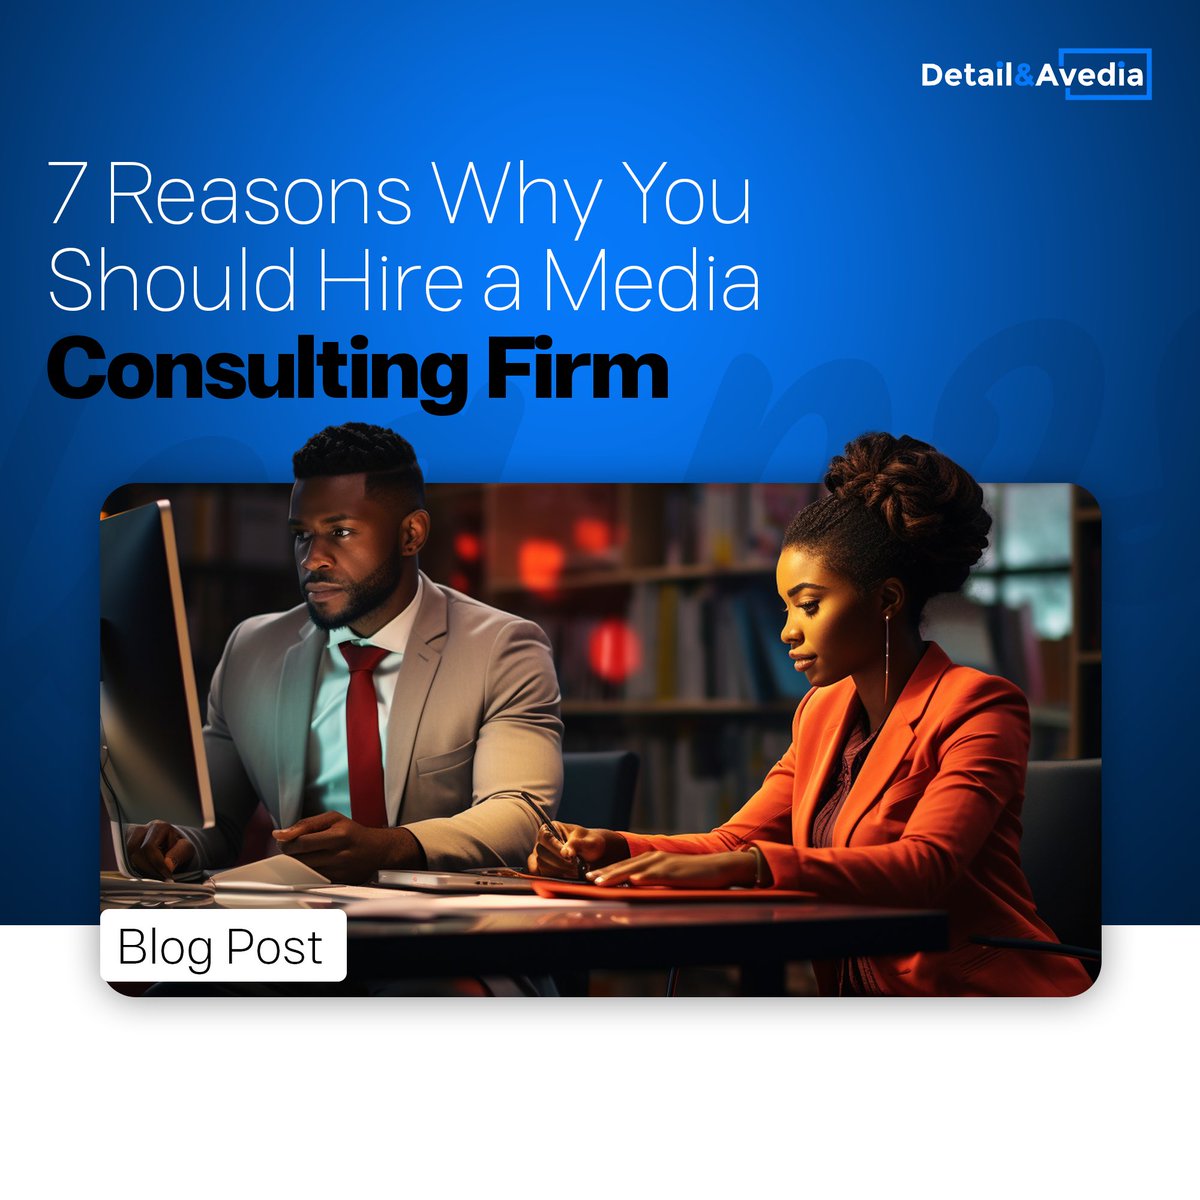 Are you looking to take your brand to new heights? Discover your brand’s full potential with the expertise and guidance of a trusted Media Consulting Firm.
Click the link in the bio to read more about reasons you should partner with a media consulting firm.